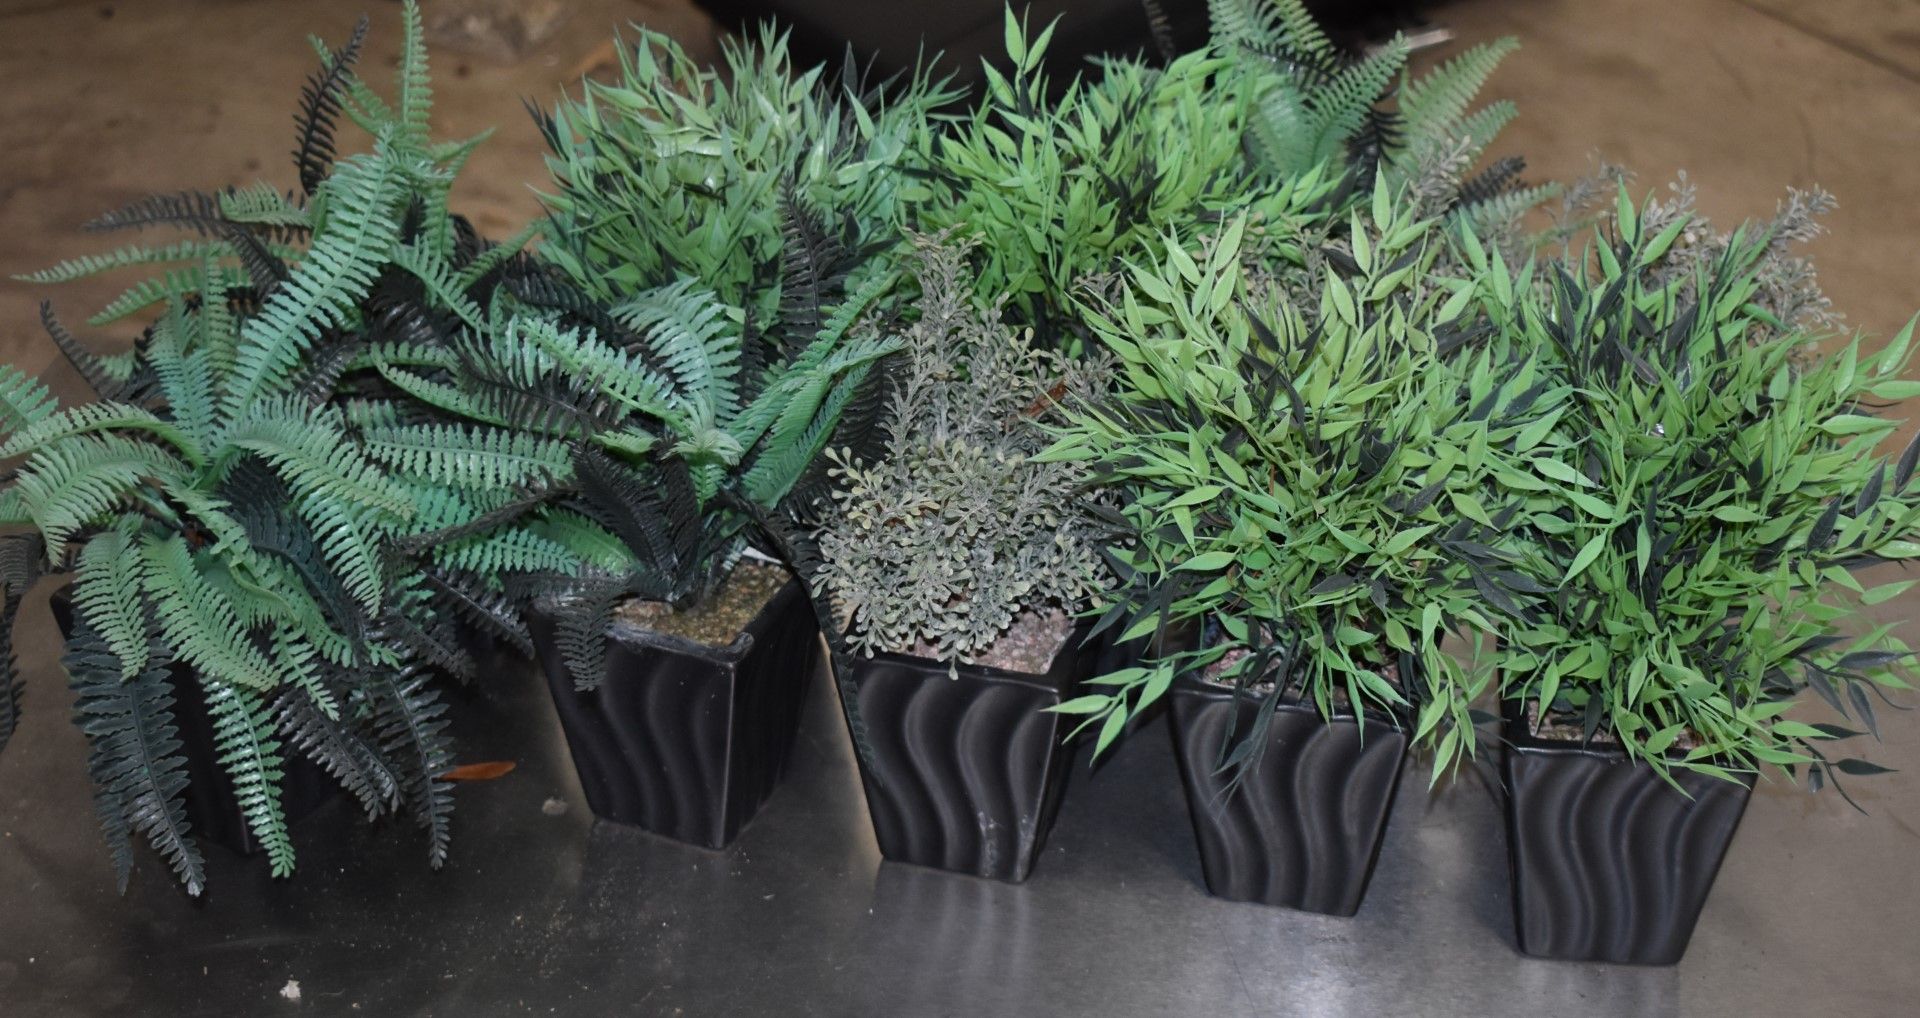 11 x Artificial Table Plants With Ceramic Planters - CL390 - Ref J1134 - Location: Altrincham WA14 - Image 4 of 4